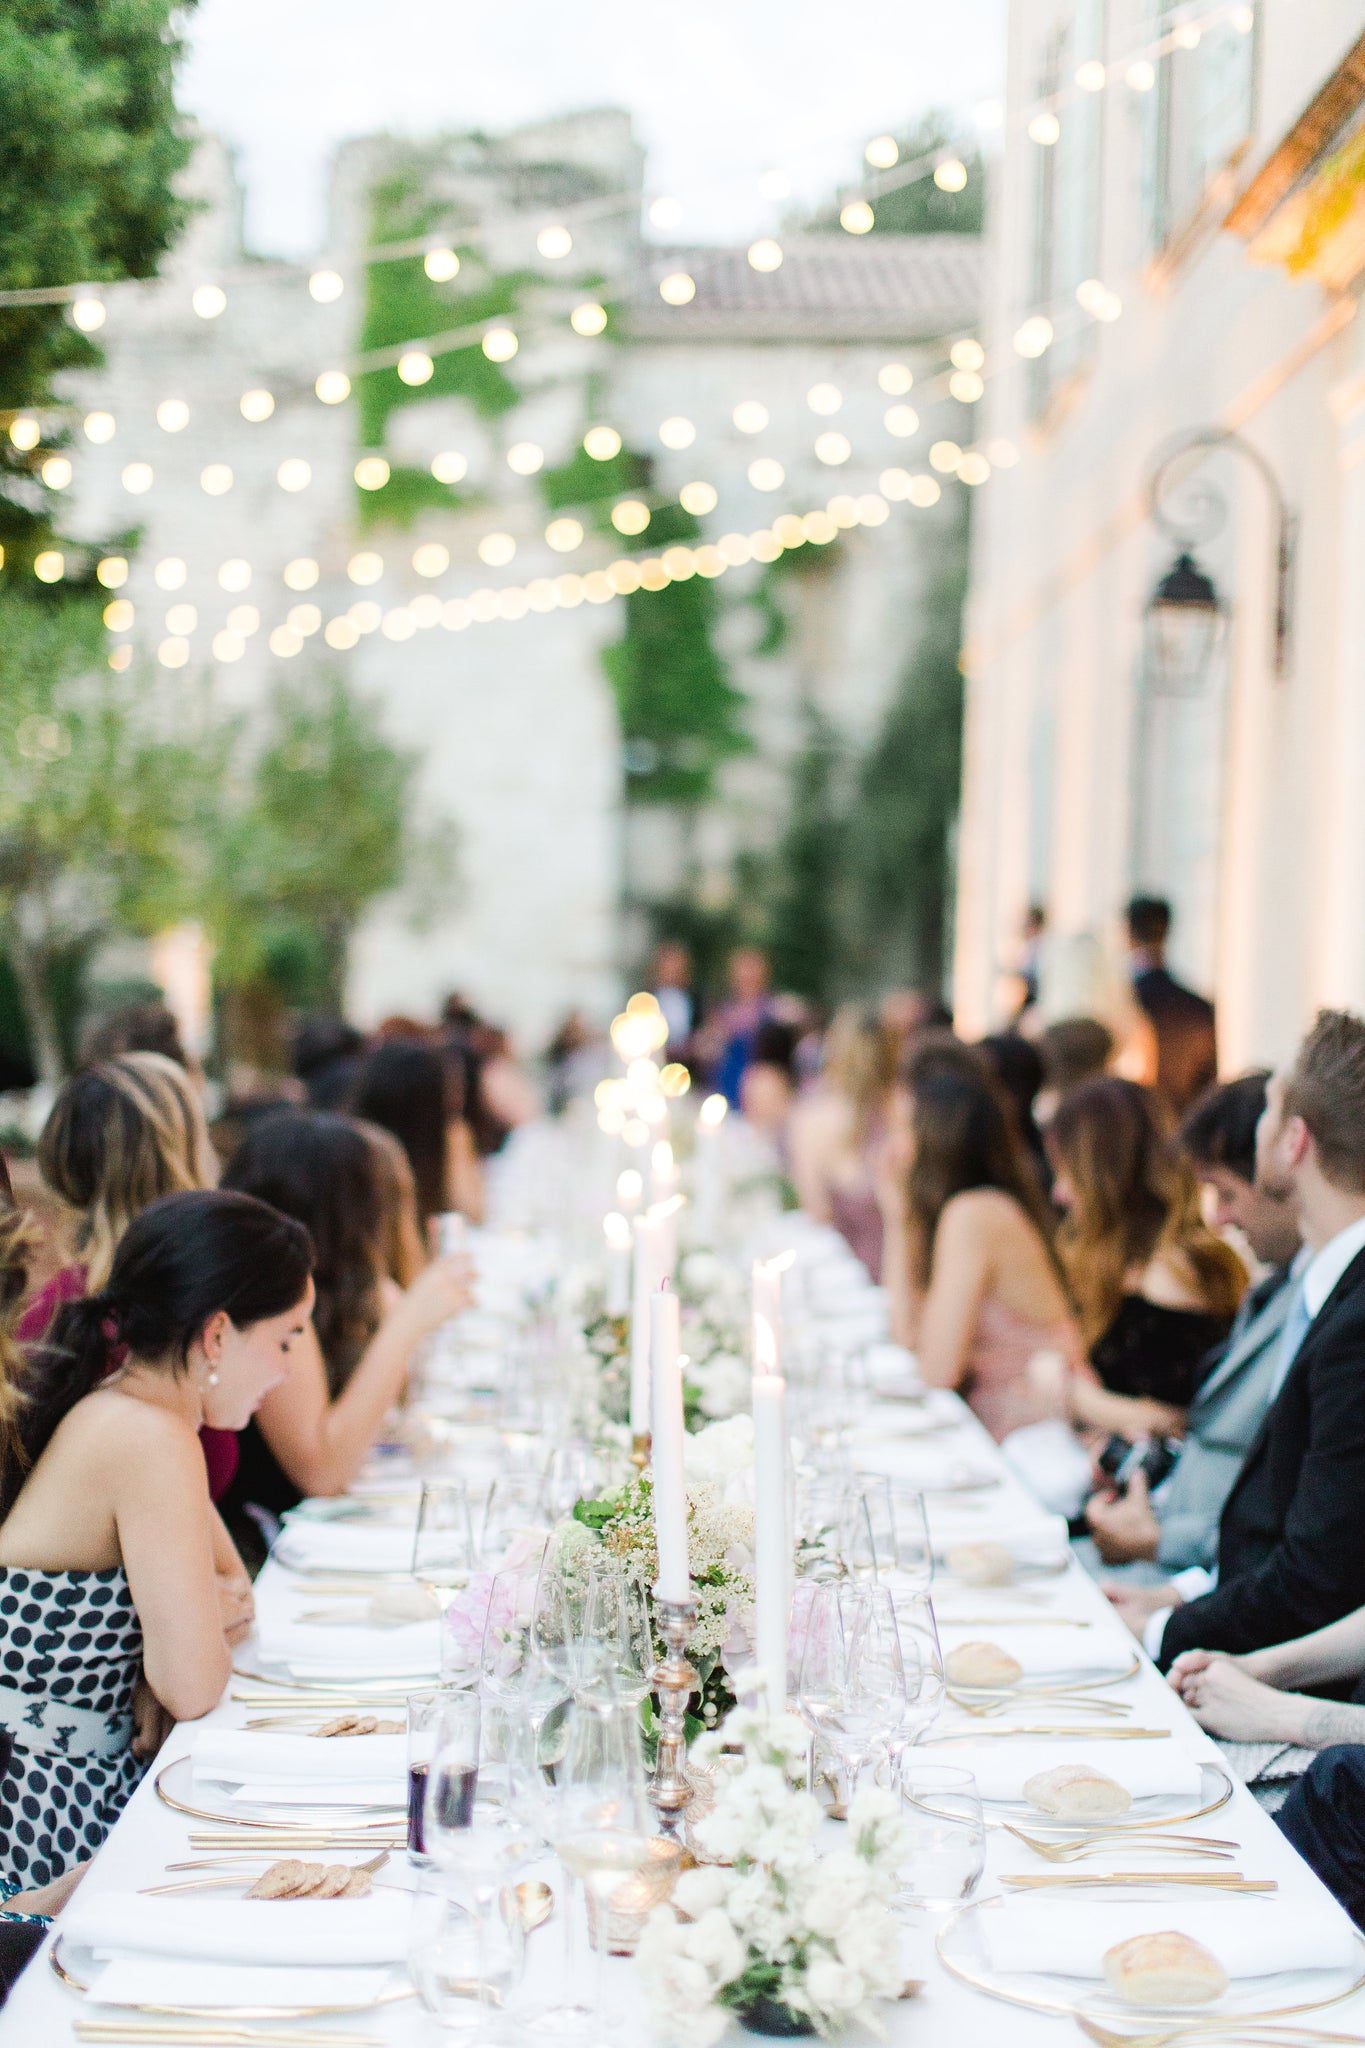 Wedding table, Katie Dean Jewelry romantic destination wedding at a chateau, Provence, France